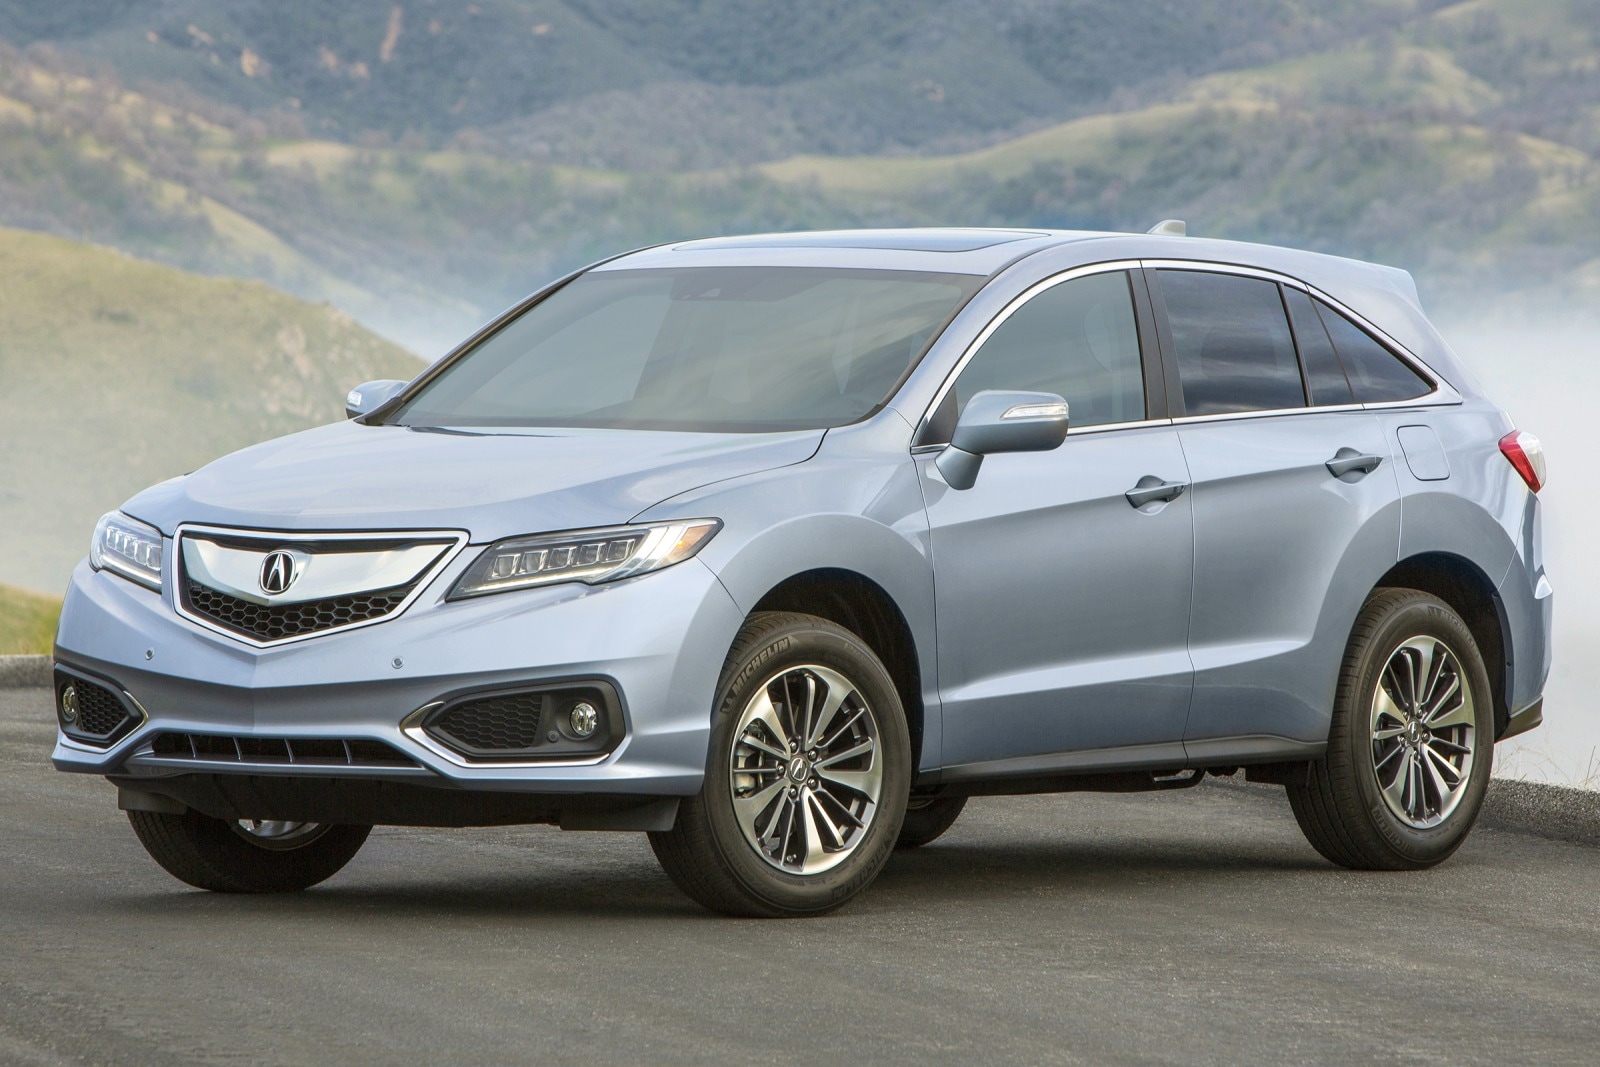 2016 Acura RDX Review & Ratings | Edmunds